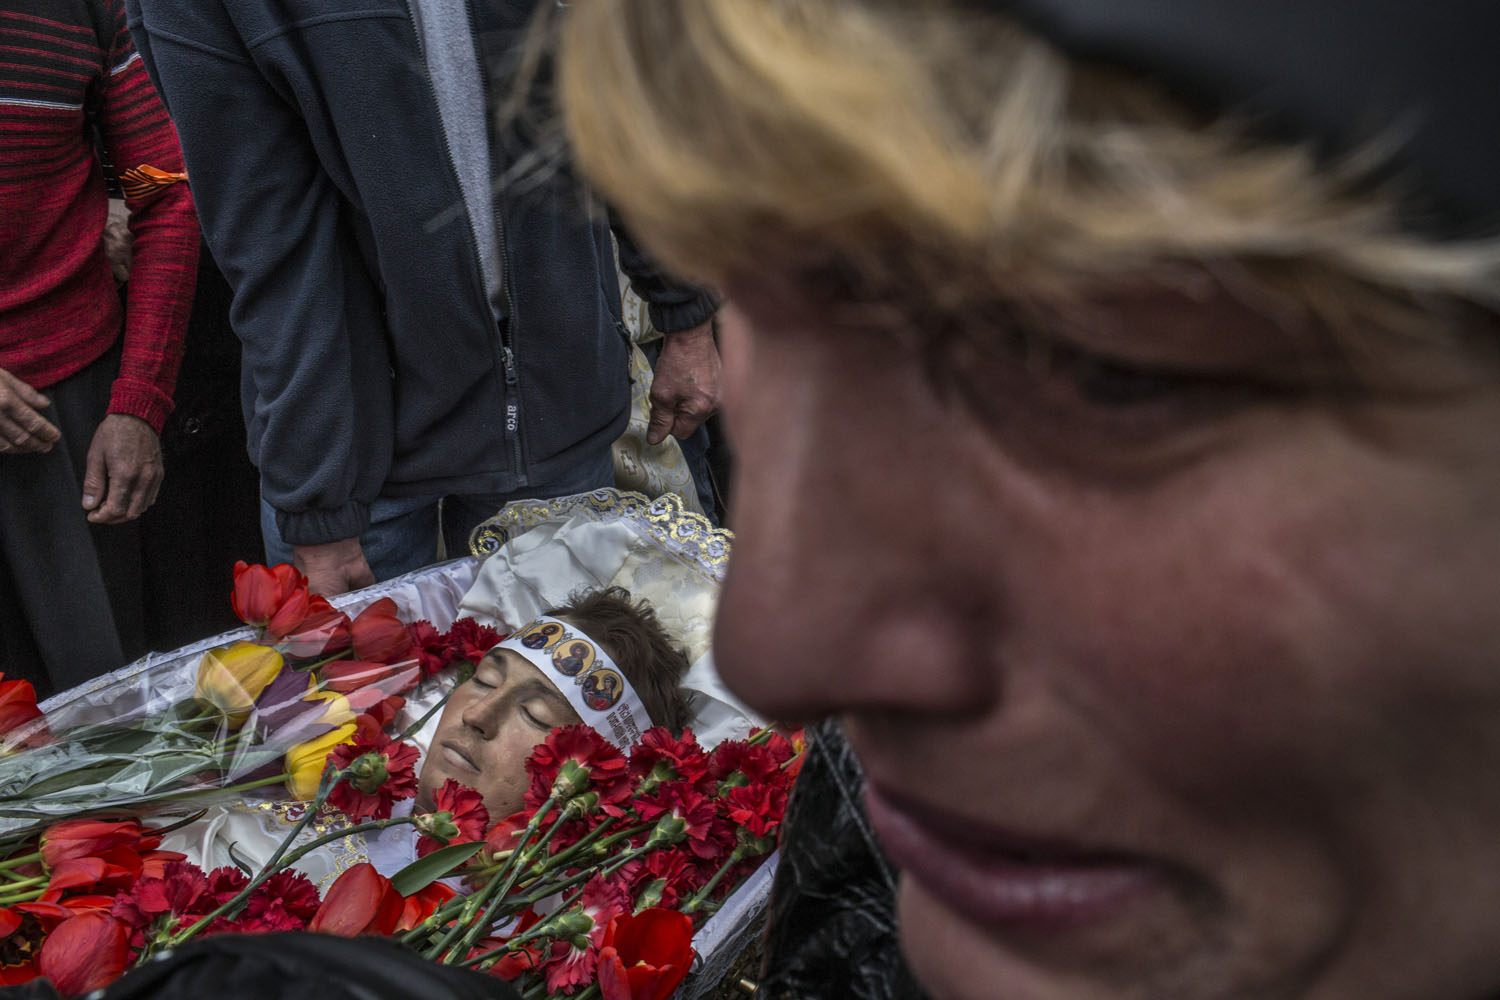 Apr. 22, 2014. A woman mourns as one of the bodies of three men killed in a shootout days earlier passes, during the mens' funeral outside the Orthodox Church of the Holy Spirit in Slovyansk, Ukraine.